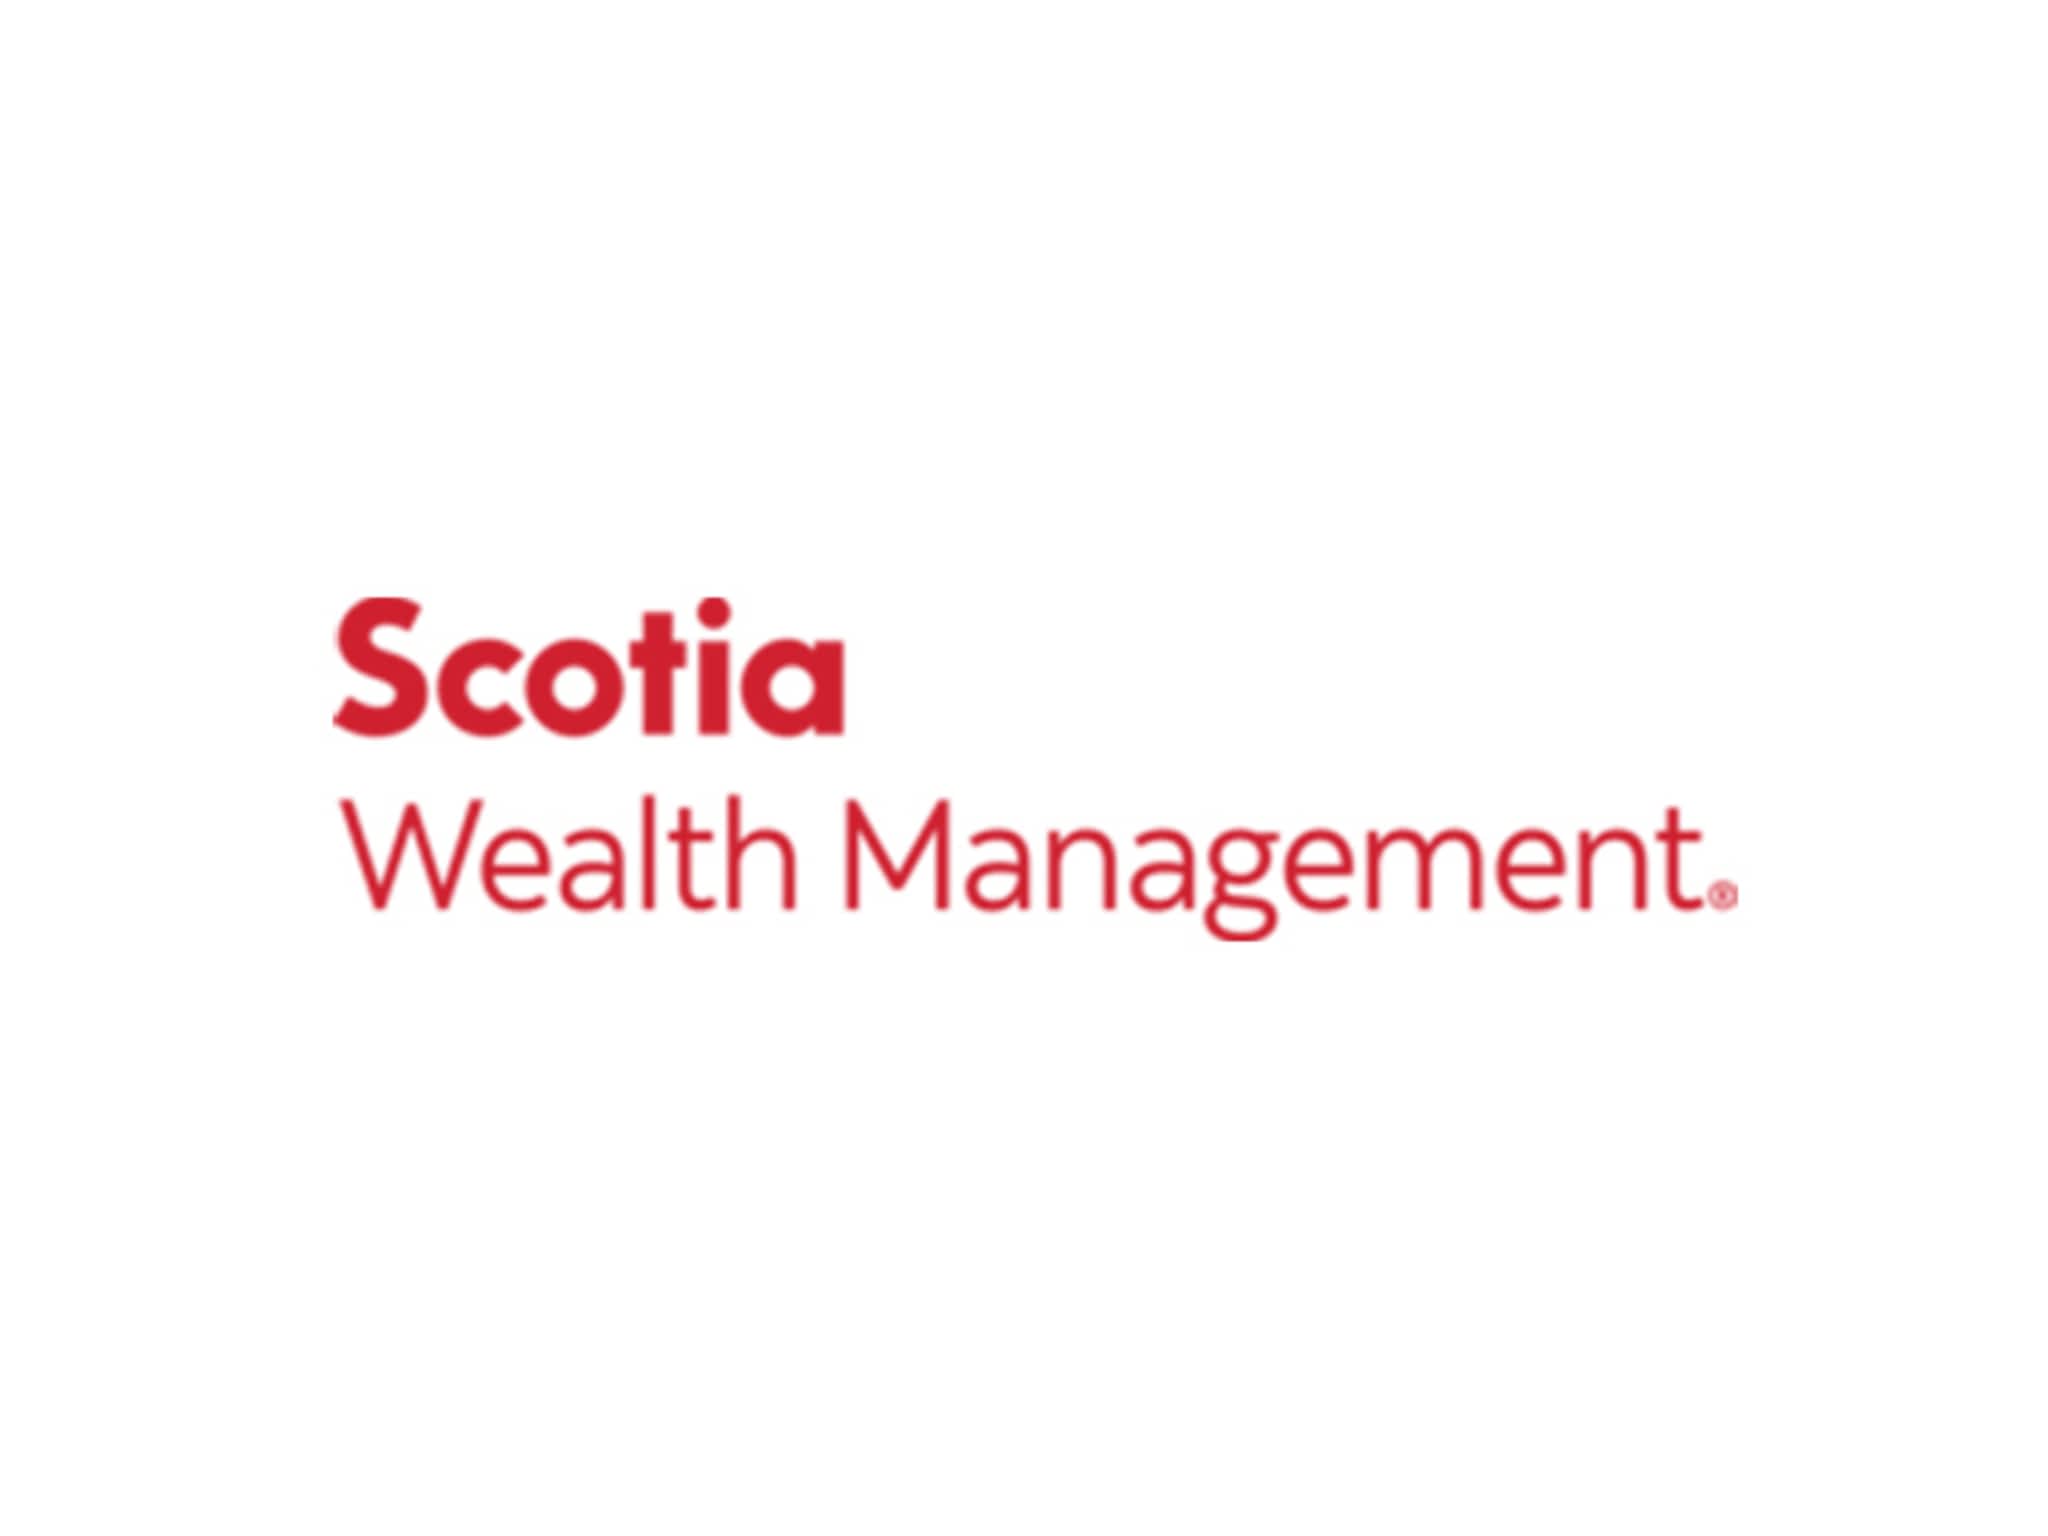 photo Victor Gendy - The Symons Group - ScotiaMcLeod - Scotia Wealth Management